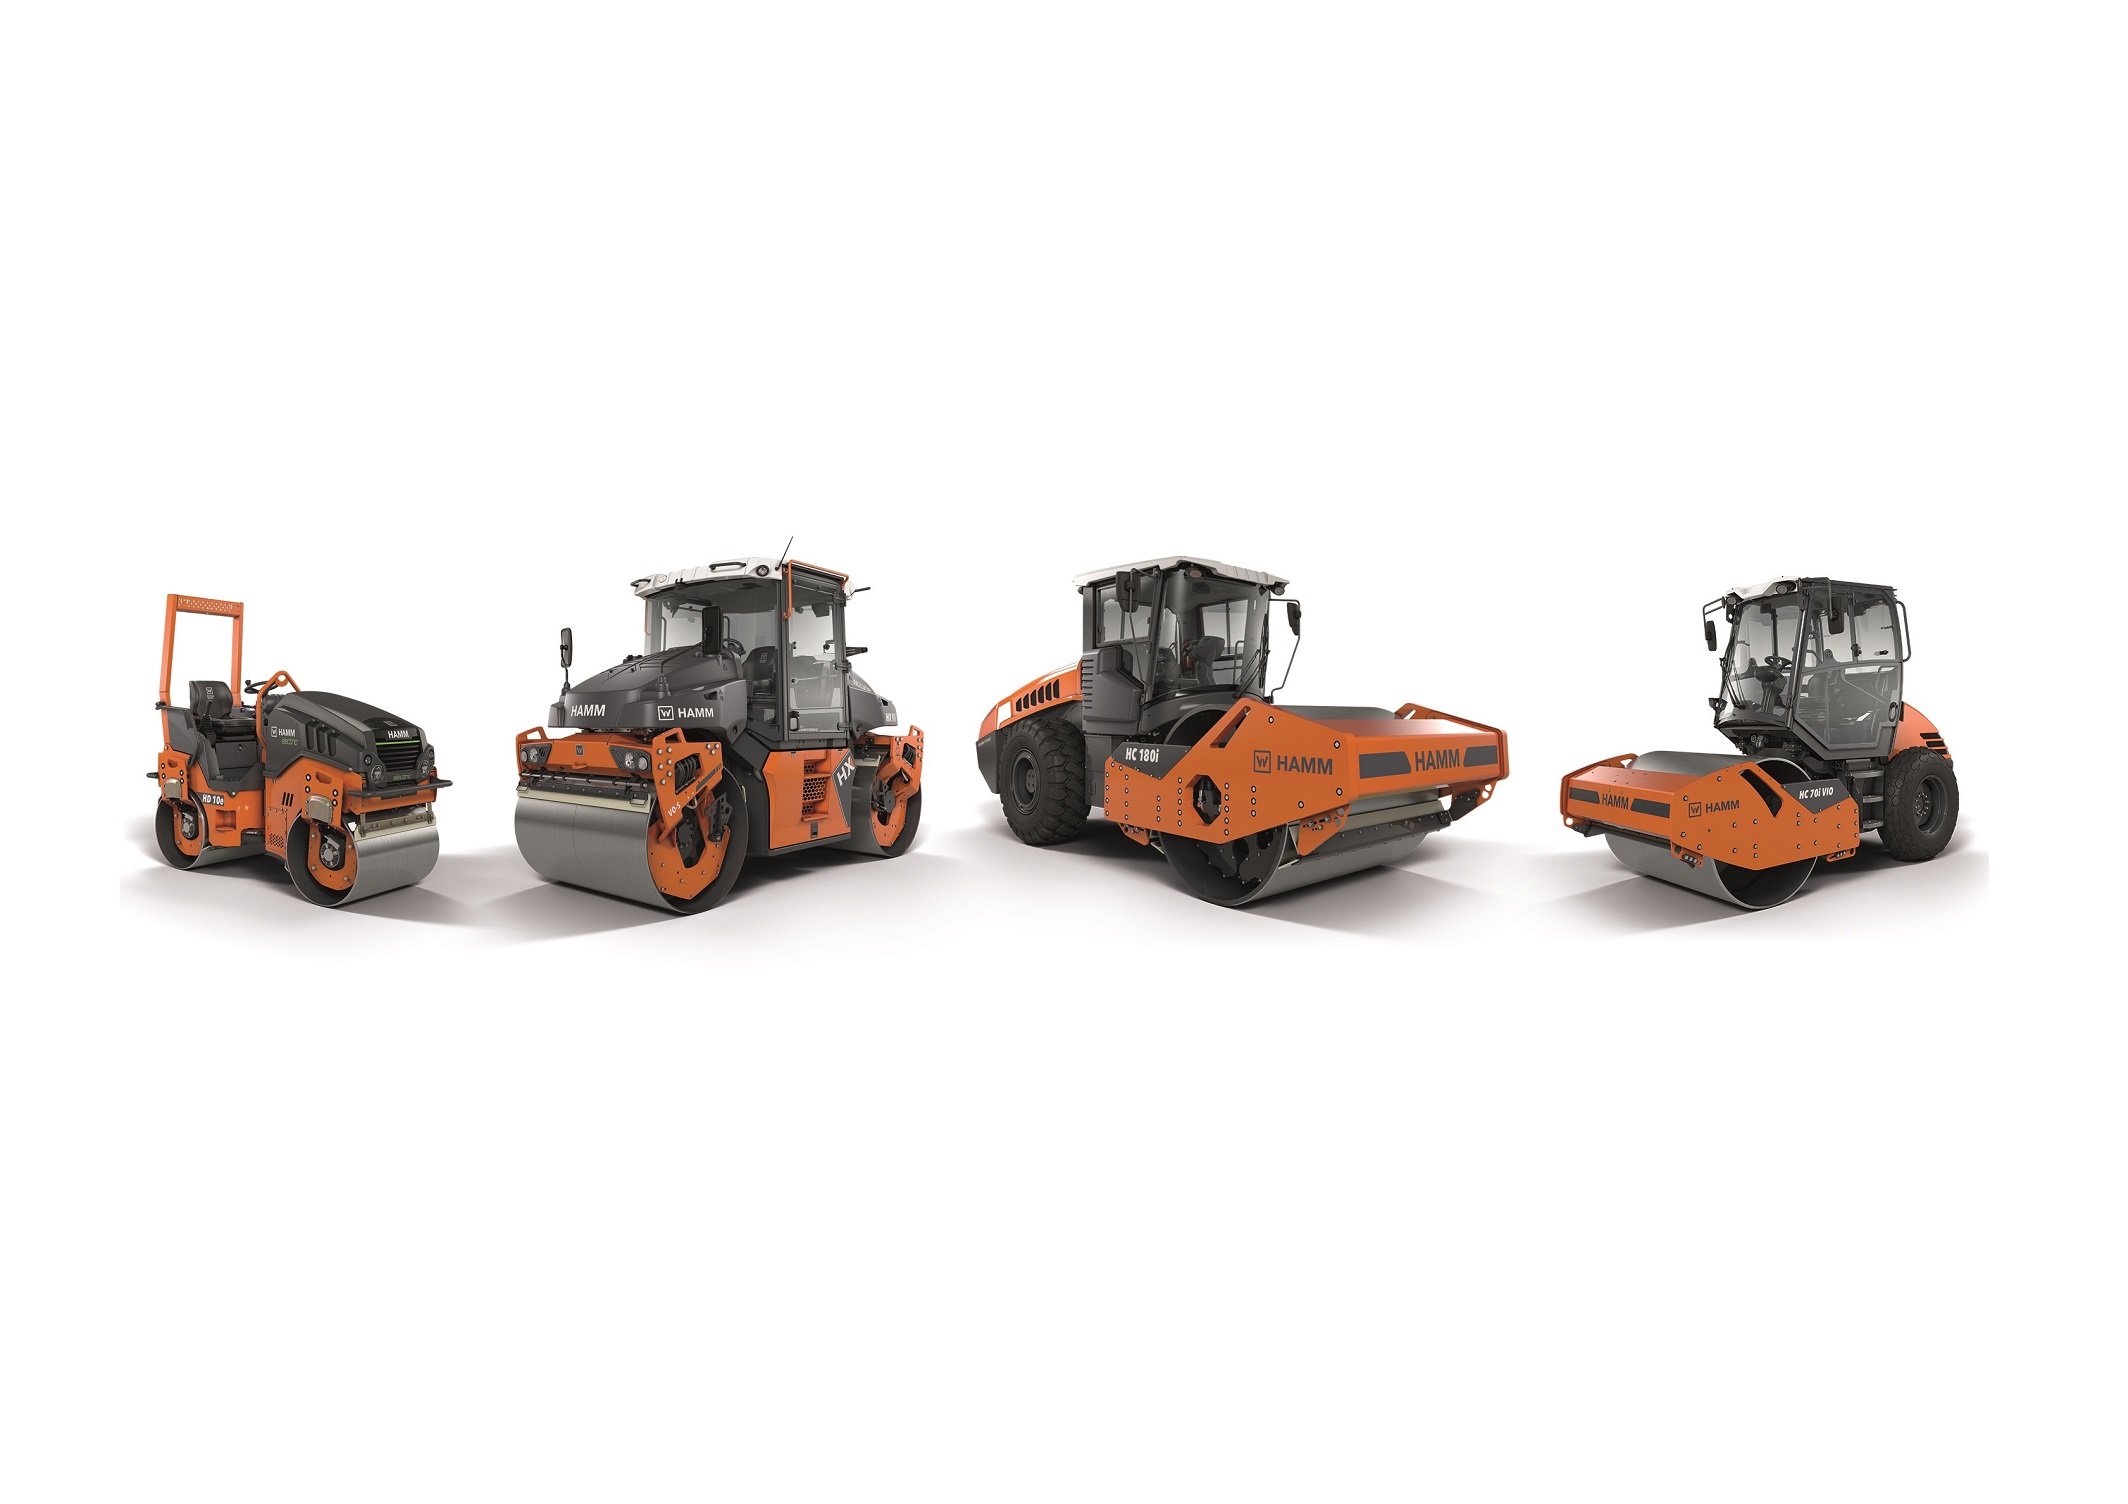 At bauma 2022, Hamm is presenting numerous new series and models: the HX series (pivot-steered tandem rollers), the HC series (compactors over 11 t), the HC CompactLine series (small compactors) and electrically powered compact rollers from the HD CompactLine range.